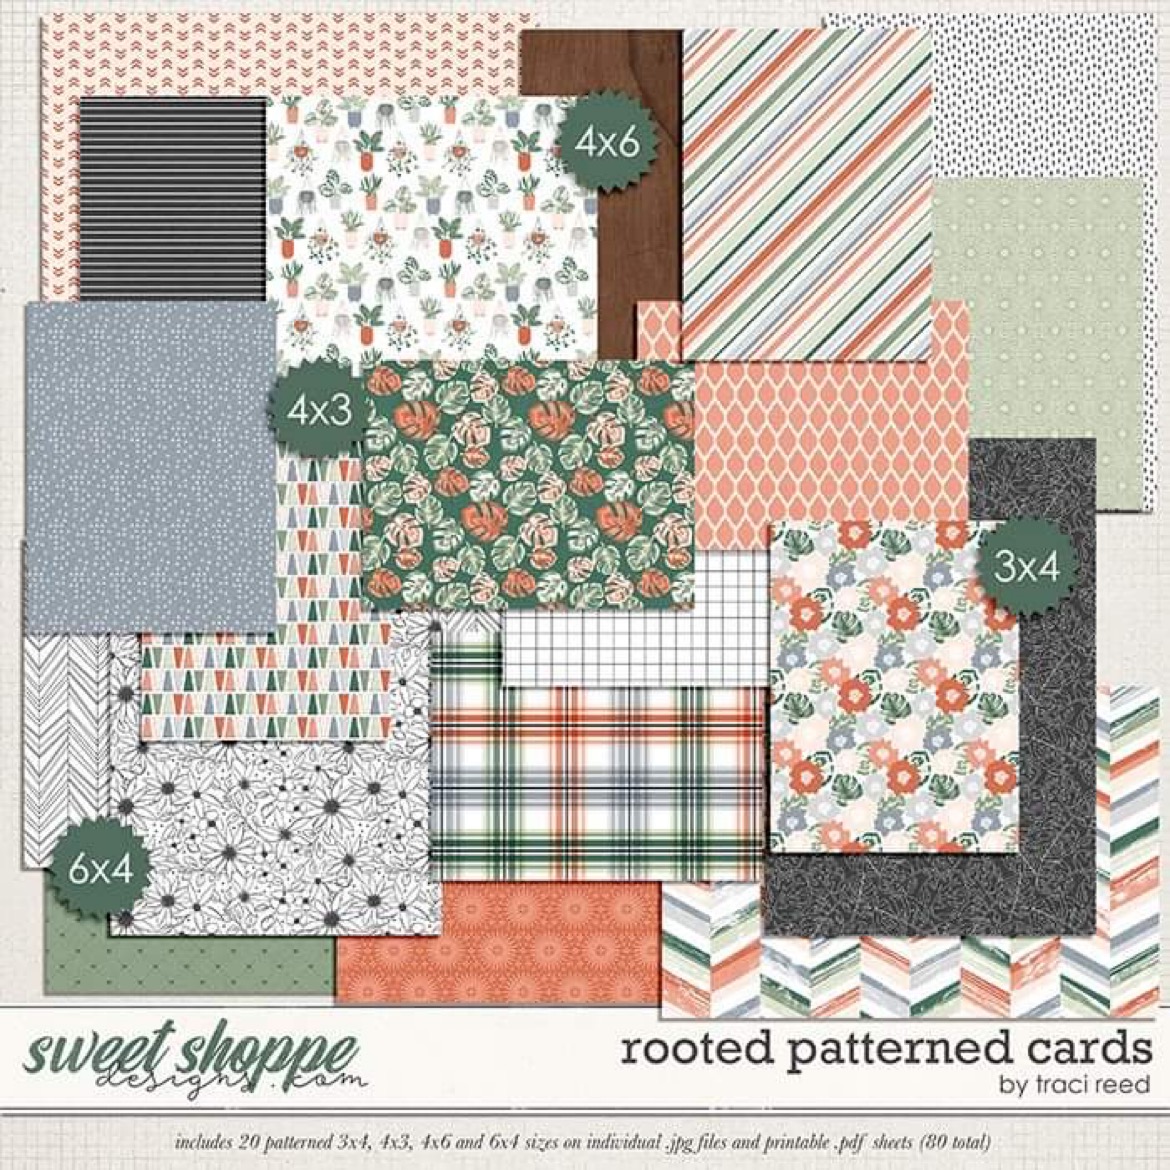 Rooted Patterned Cards by Traci Reed